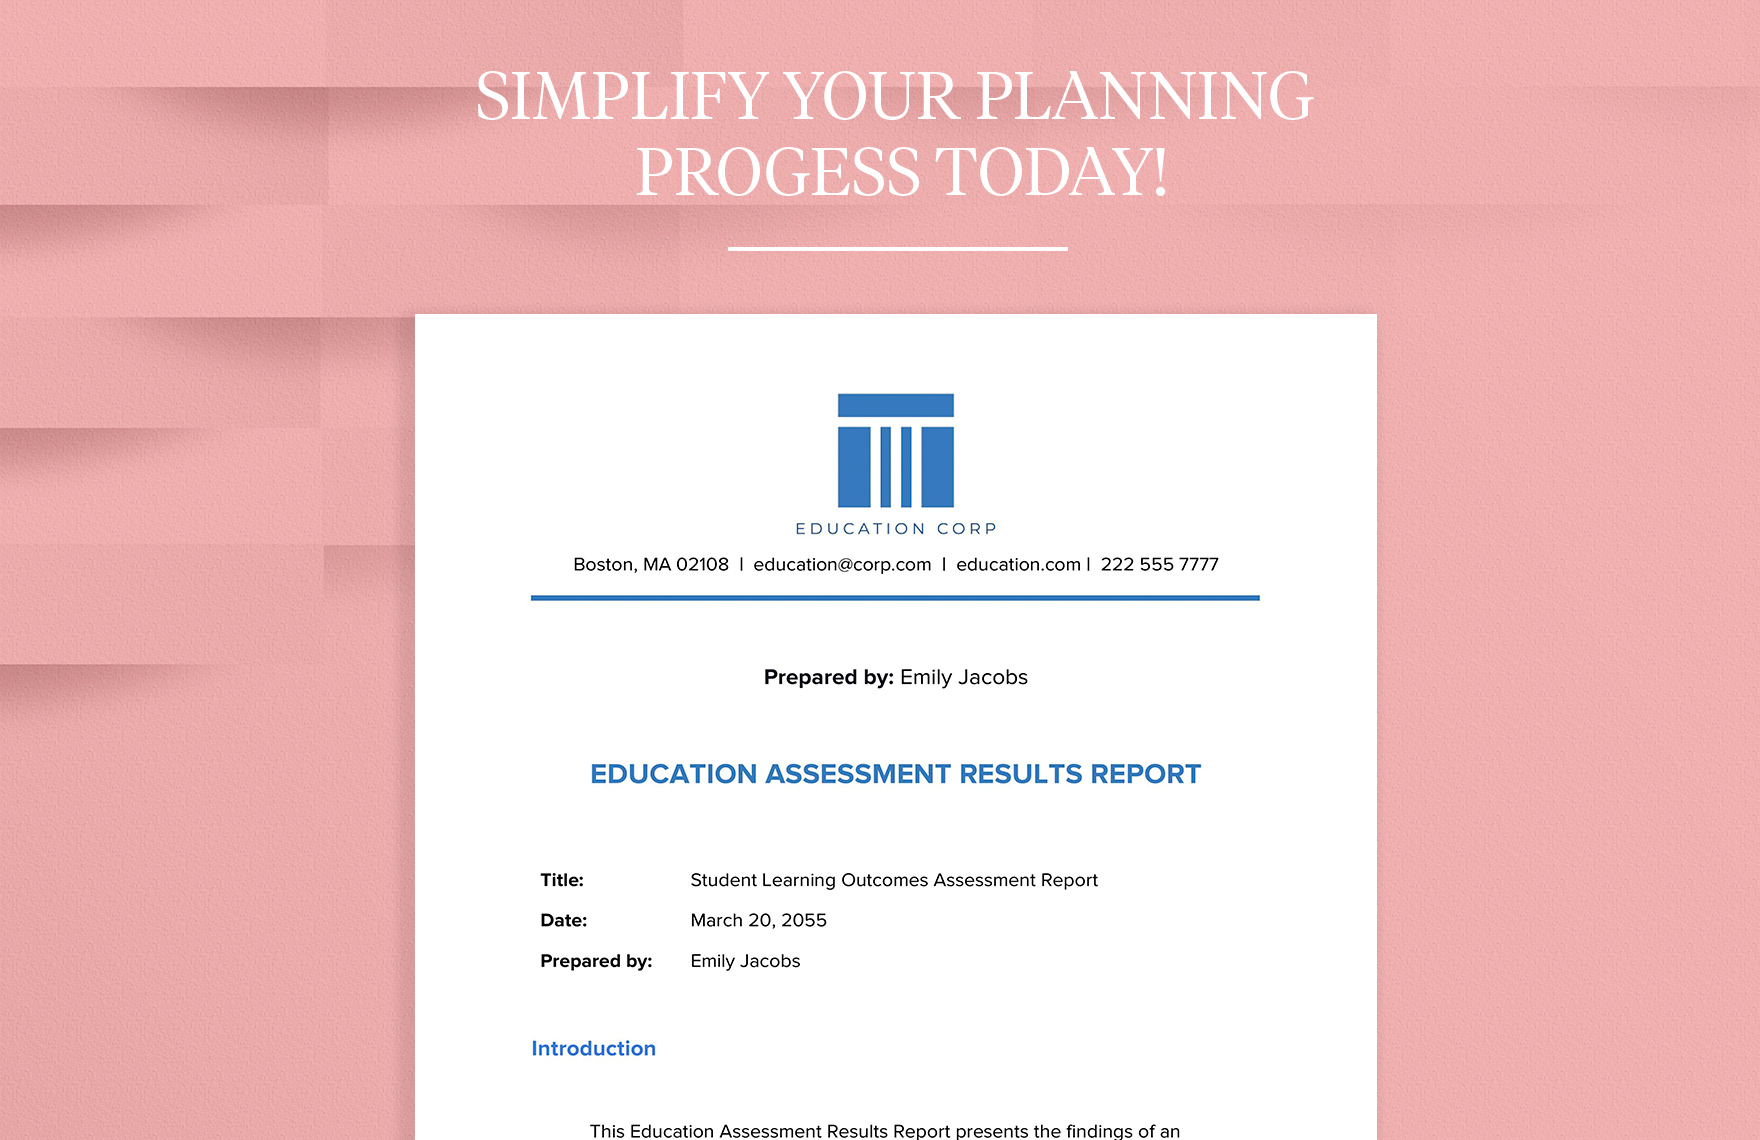 Education Assessment Results Report 